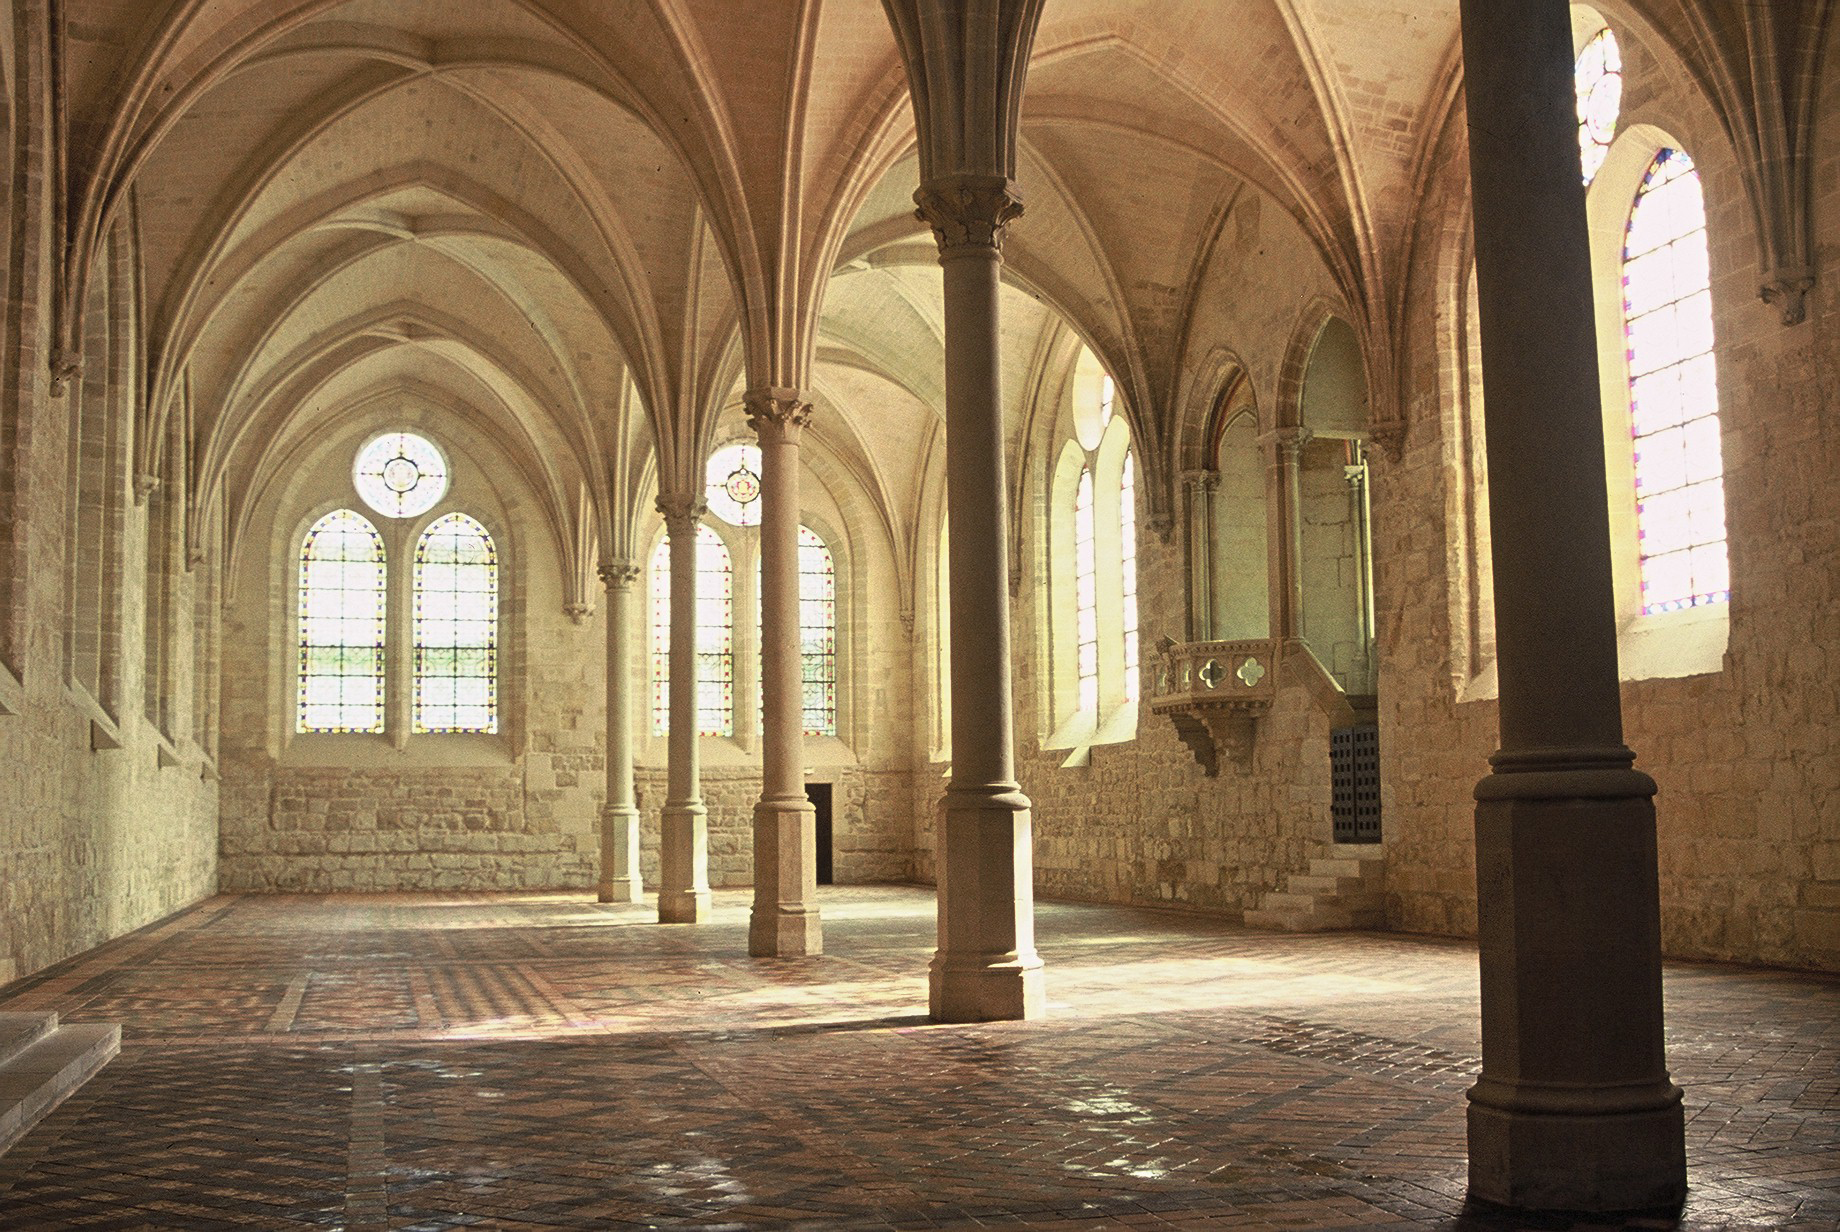 The monks' refectory